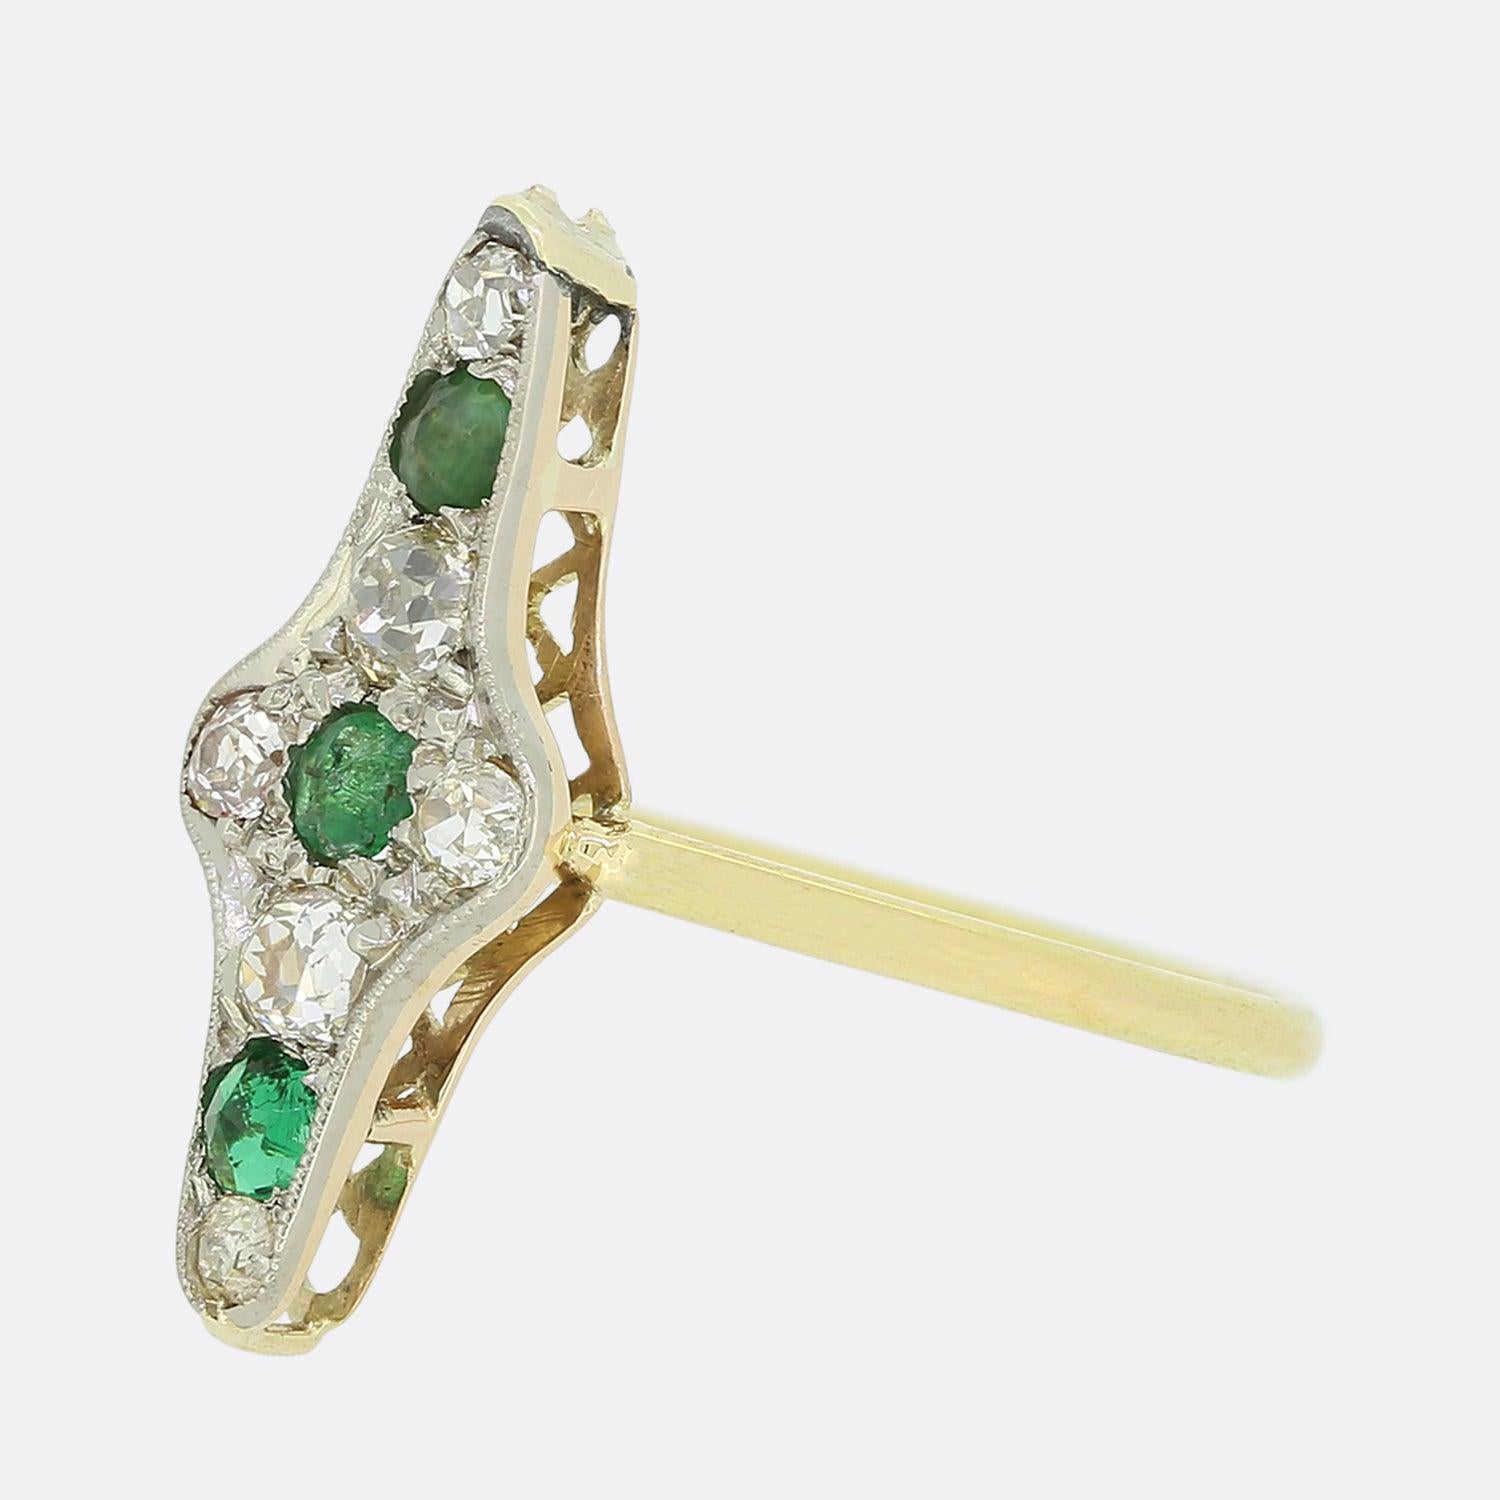 Here we have an excellent emerald and diamond tablet ring. This piece has been created using components of an authentic Art Deco necklace and boasts a wonderful array of round emeralds and old cut diamonds; all of which have been neatly set within